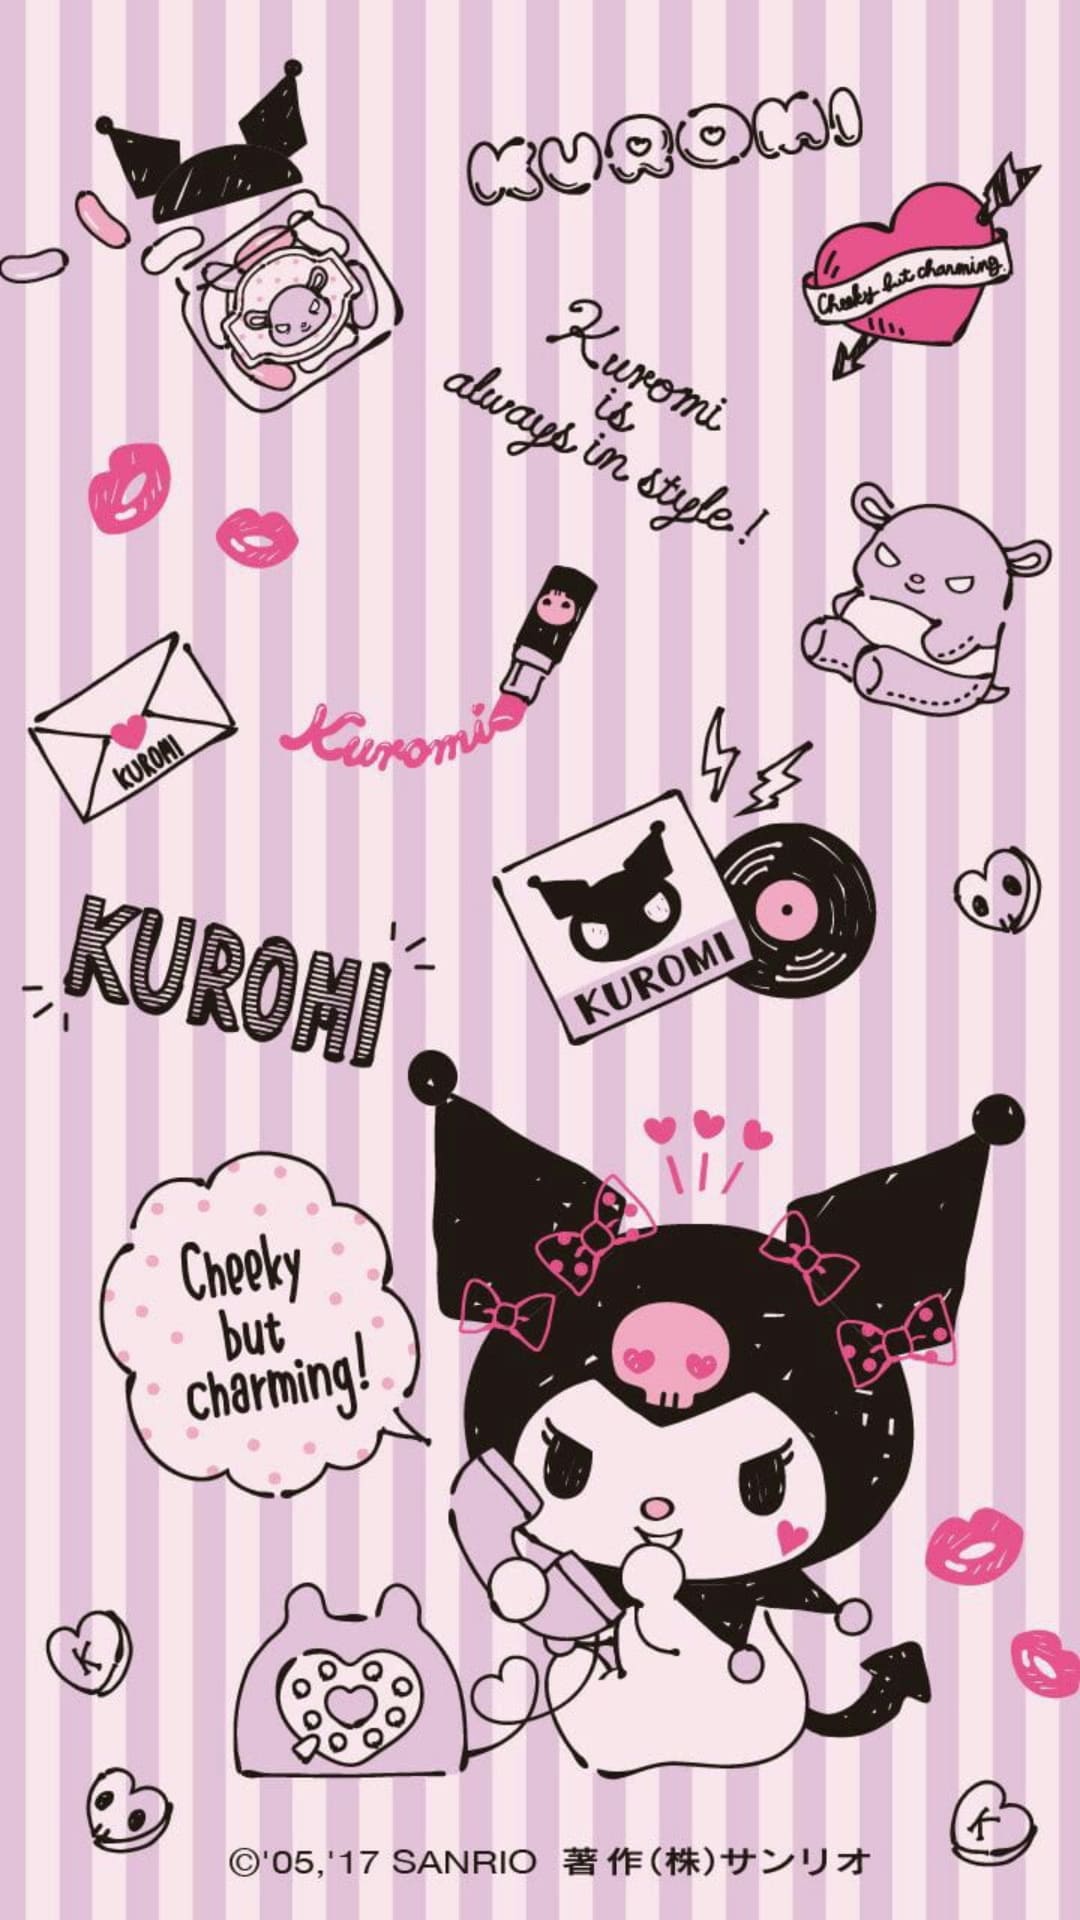 Kuromi wallpaper I made for my phone! Credit to the artist! - Kuromi, My Melody